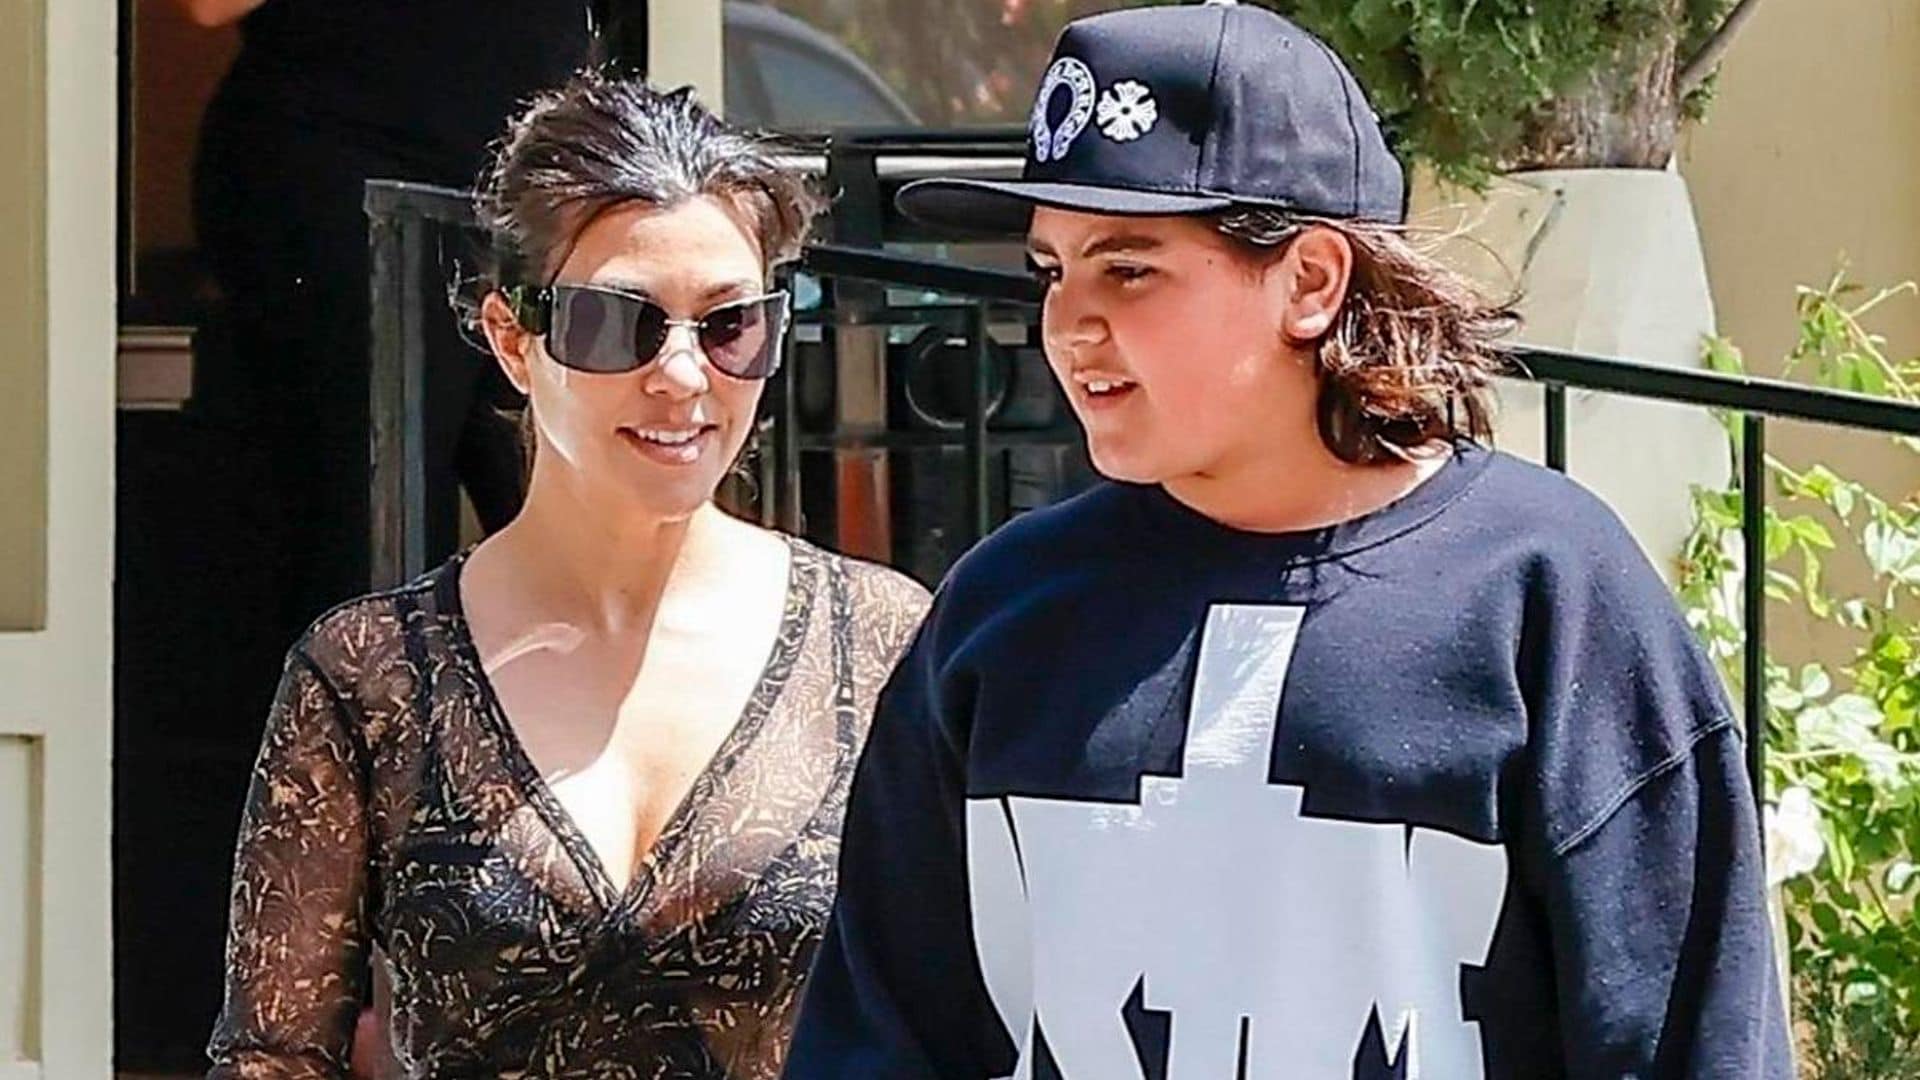 Kim, Khloé and Kourtney Kardashian react to Mason Disick’s update: ‘I can’t believe this is happening’